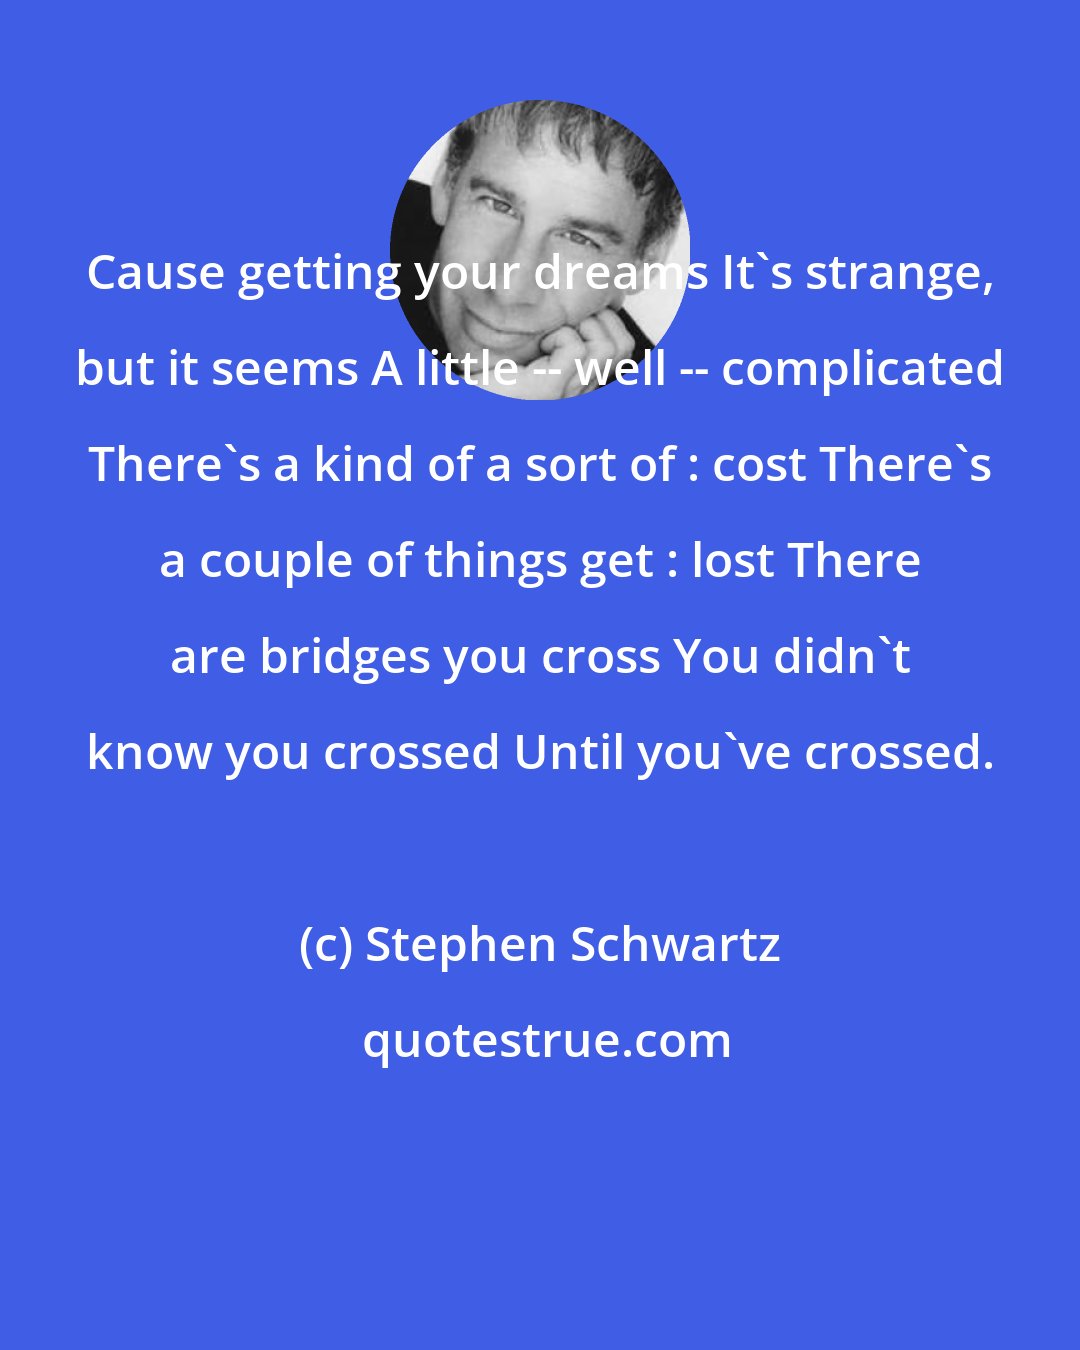 Stephen Schwartz: Cause getting your dreams It's strange, but it seems A little -- well -- complicated There's a kind of a sort of : cost There's a couple of things get : lost There are bridges you cross You didn't know you crossed Until you've crossed.